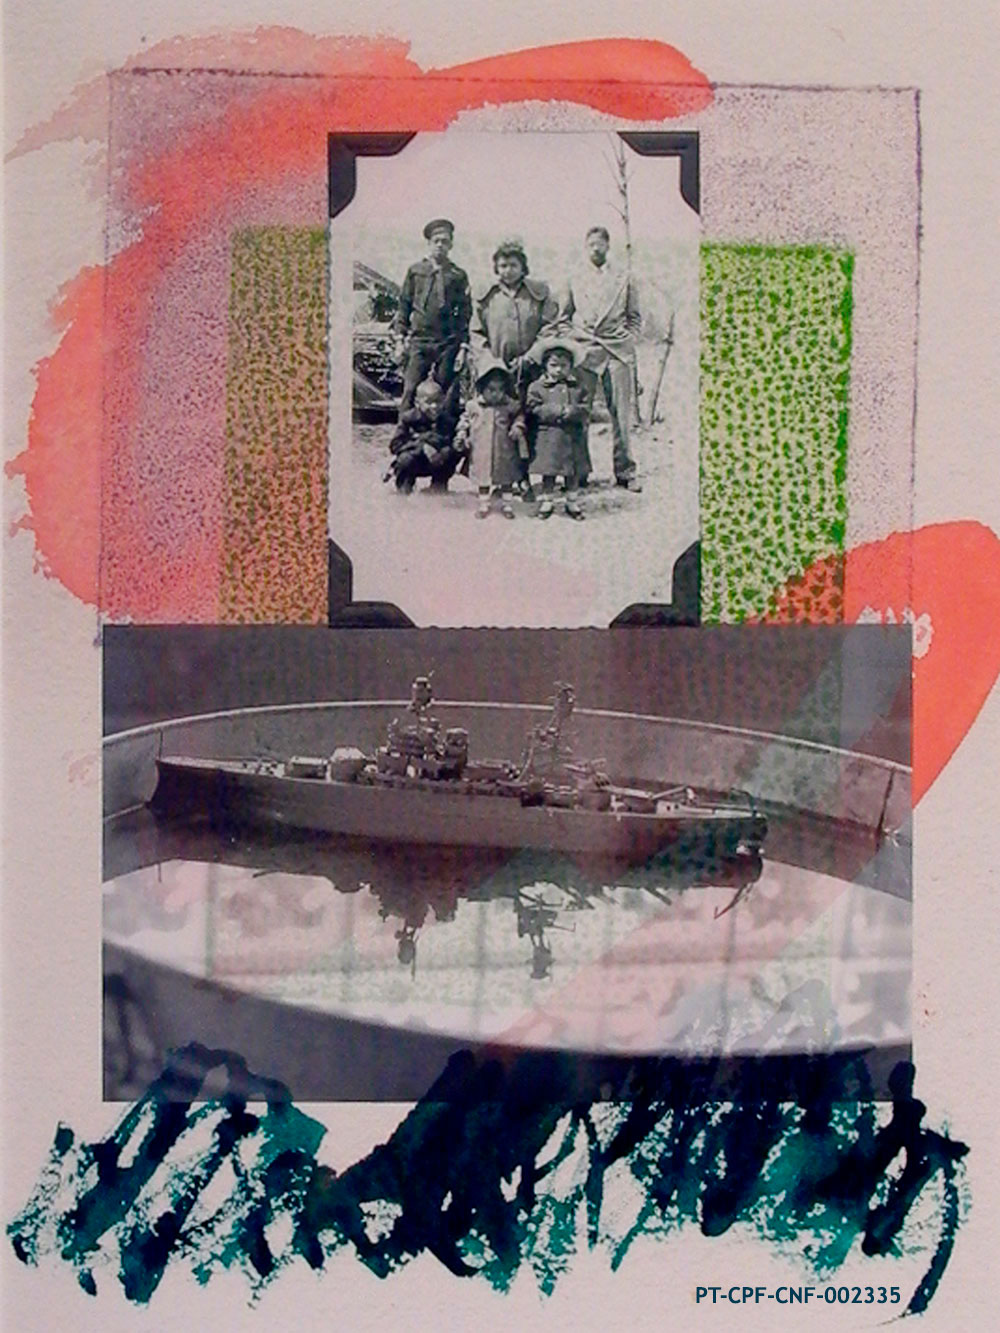 Clarissa Sligh (1939); Passages, Family 3, 2002 (Archive pigmented ink jet print); PT/CPF/CNF/002335